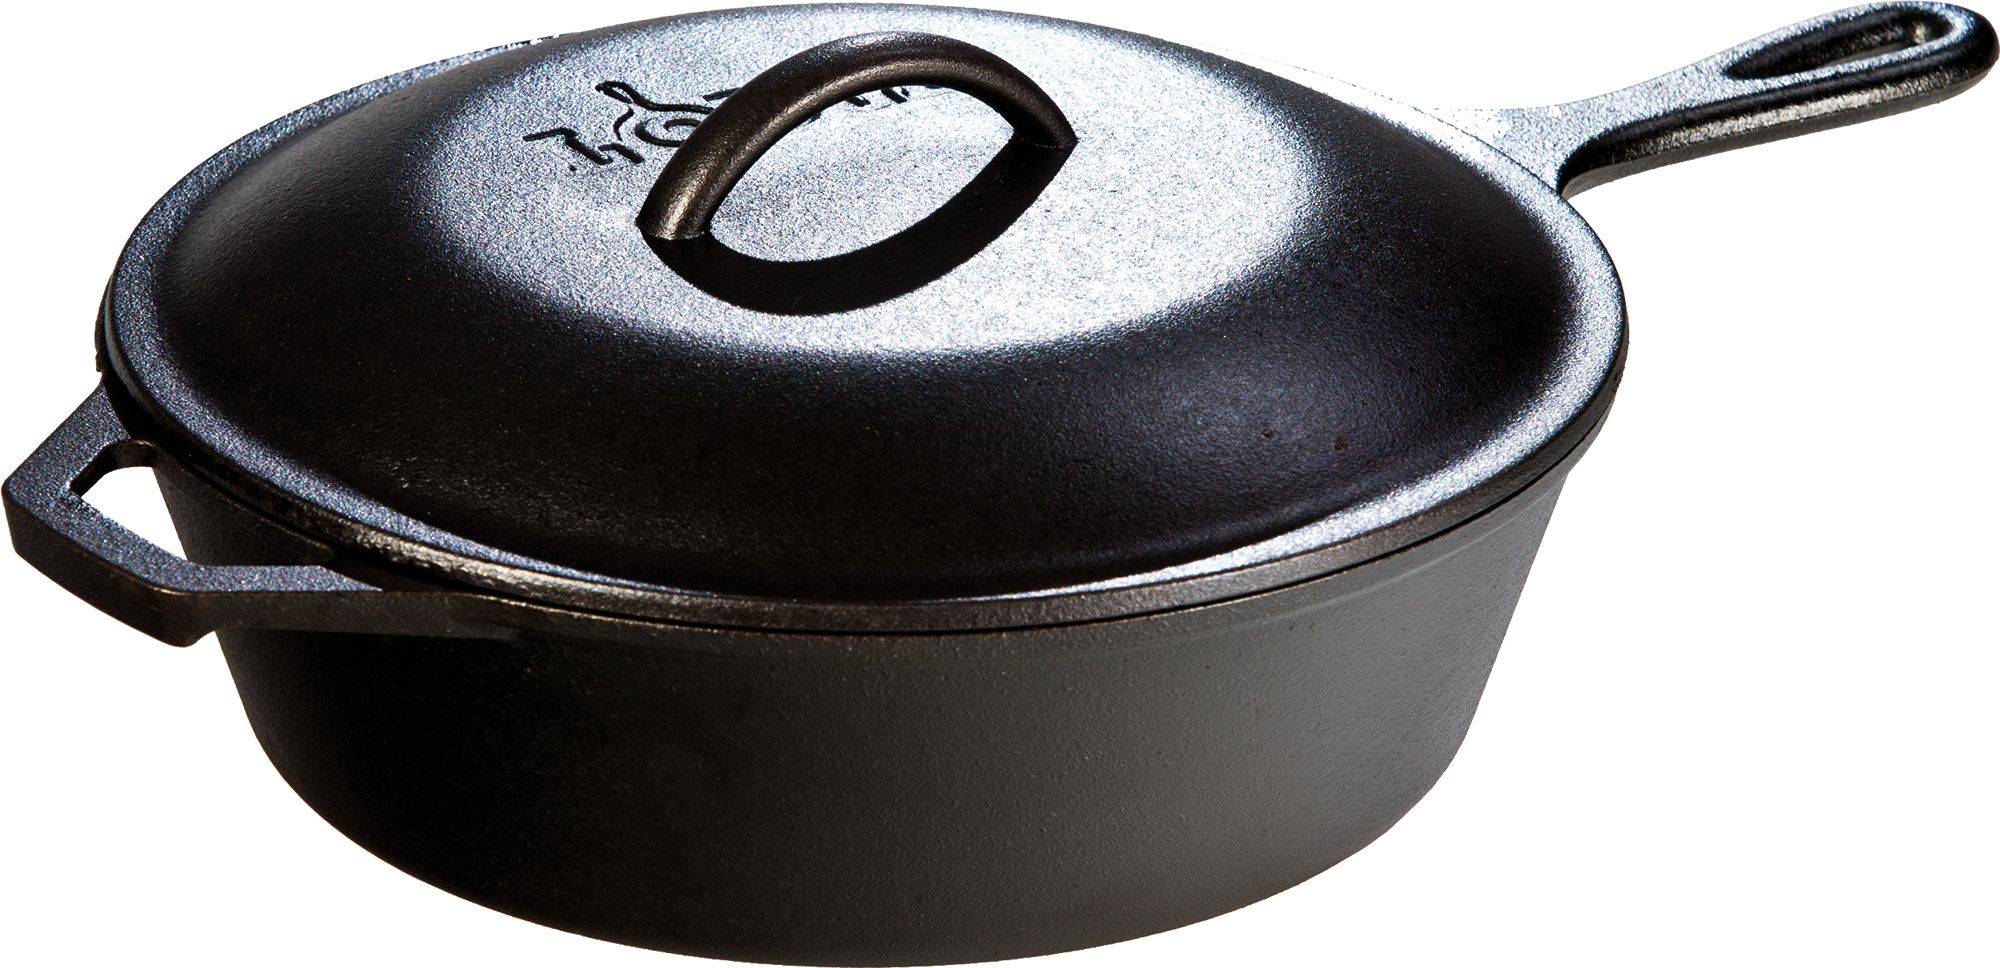 Lodge Camping 3 Qt Cast Iron Chicken Fryer with Cover